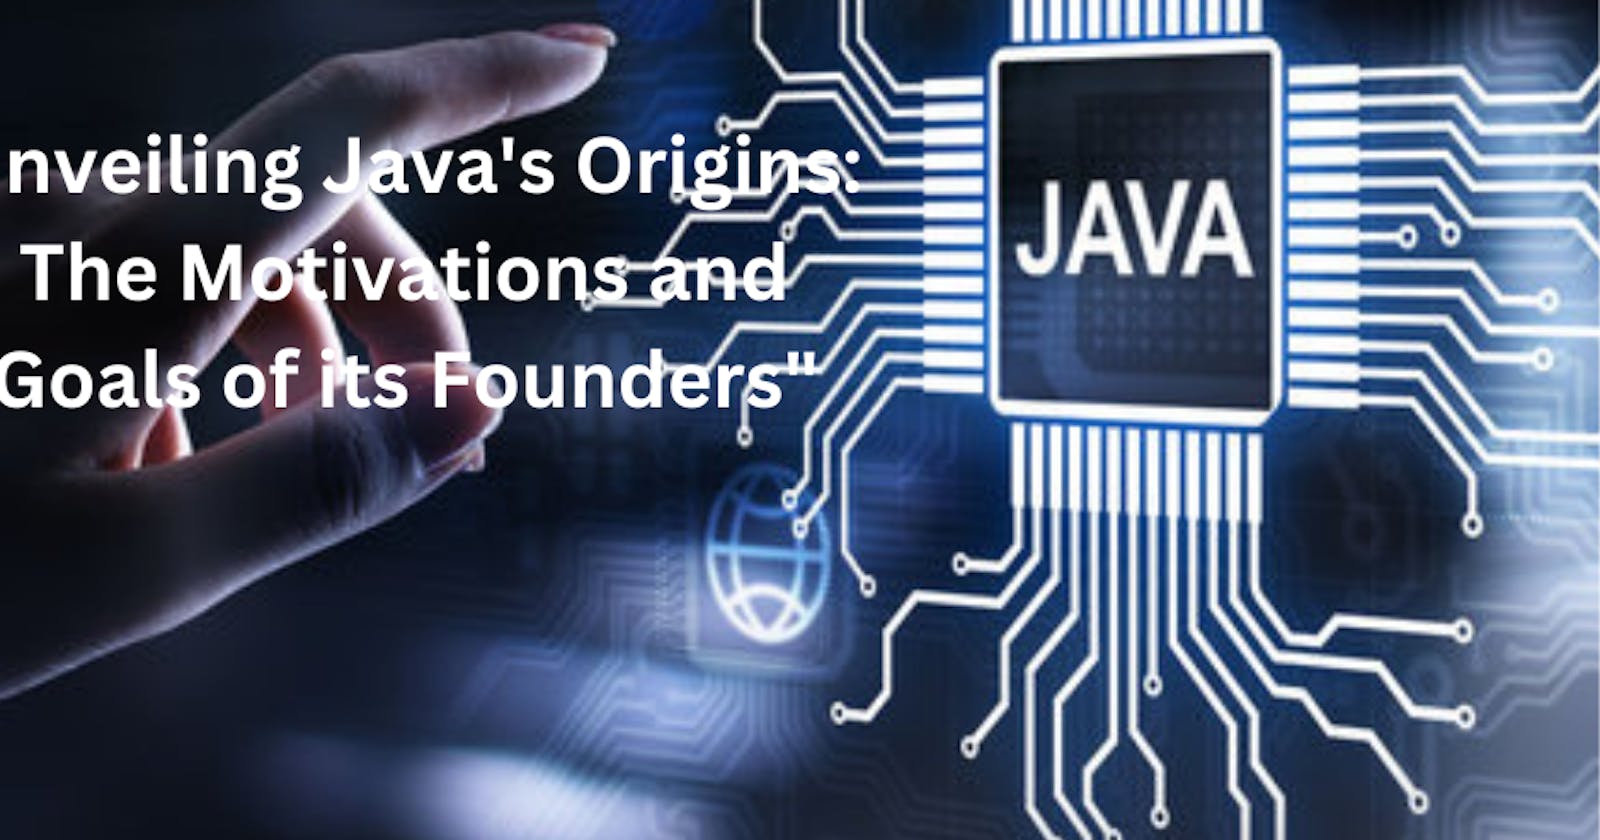 Unveiling Java's Origins: The Motivations and Goals of its Founders"